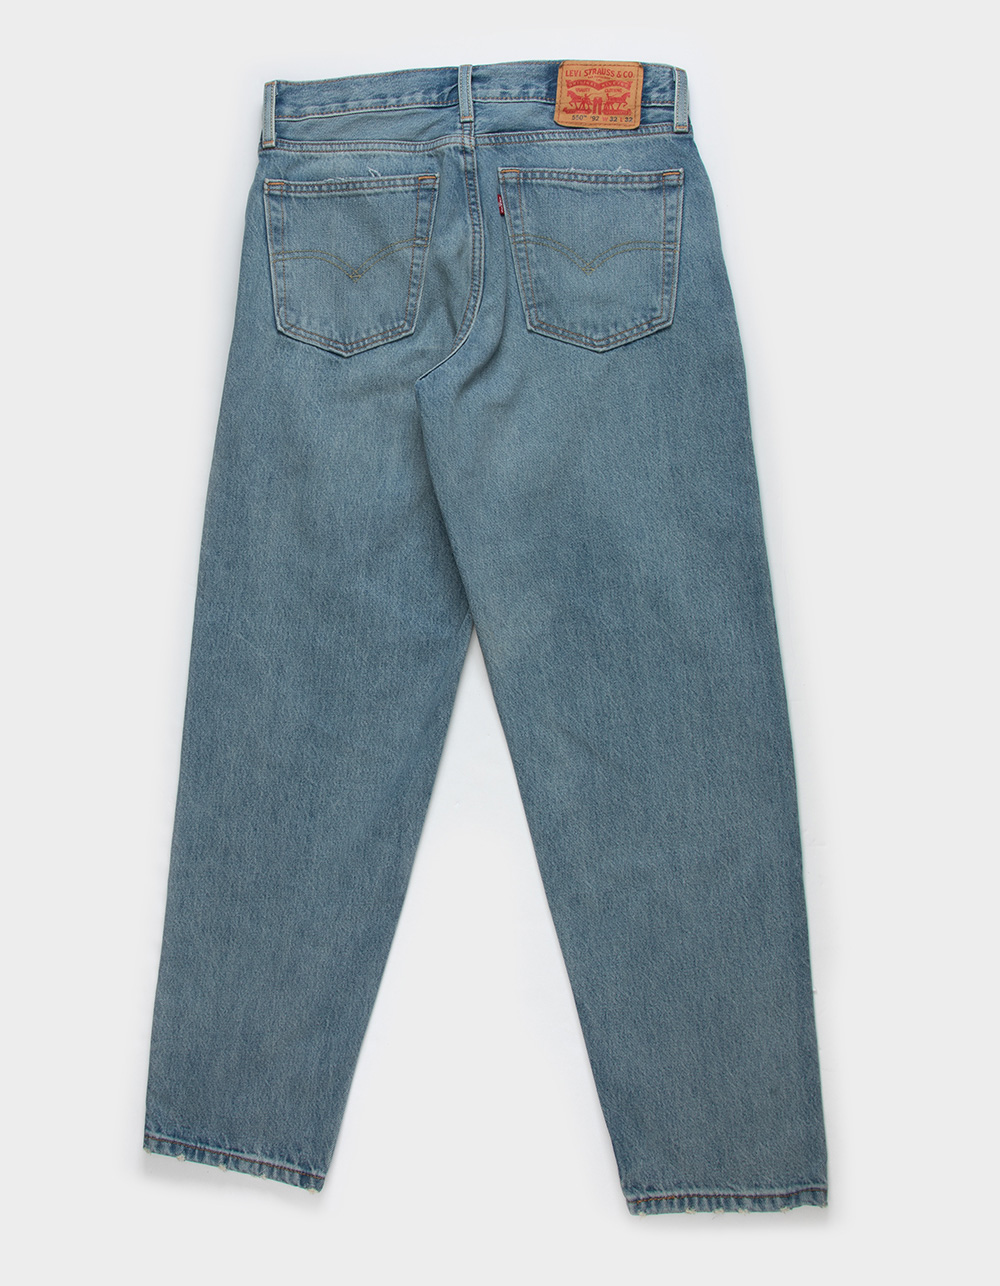 LEVI'S 550™ '92 Relaxed Mens Jeans - Whole New Moods - LIGHT INDIGO ...